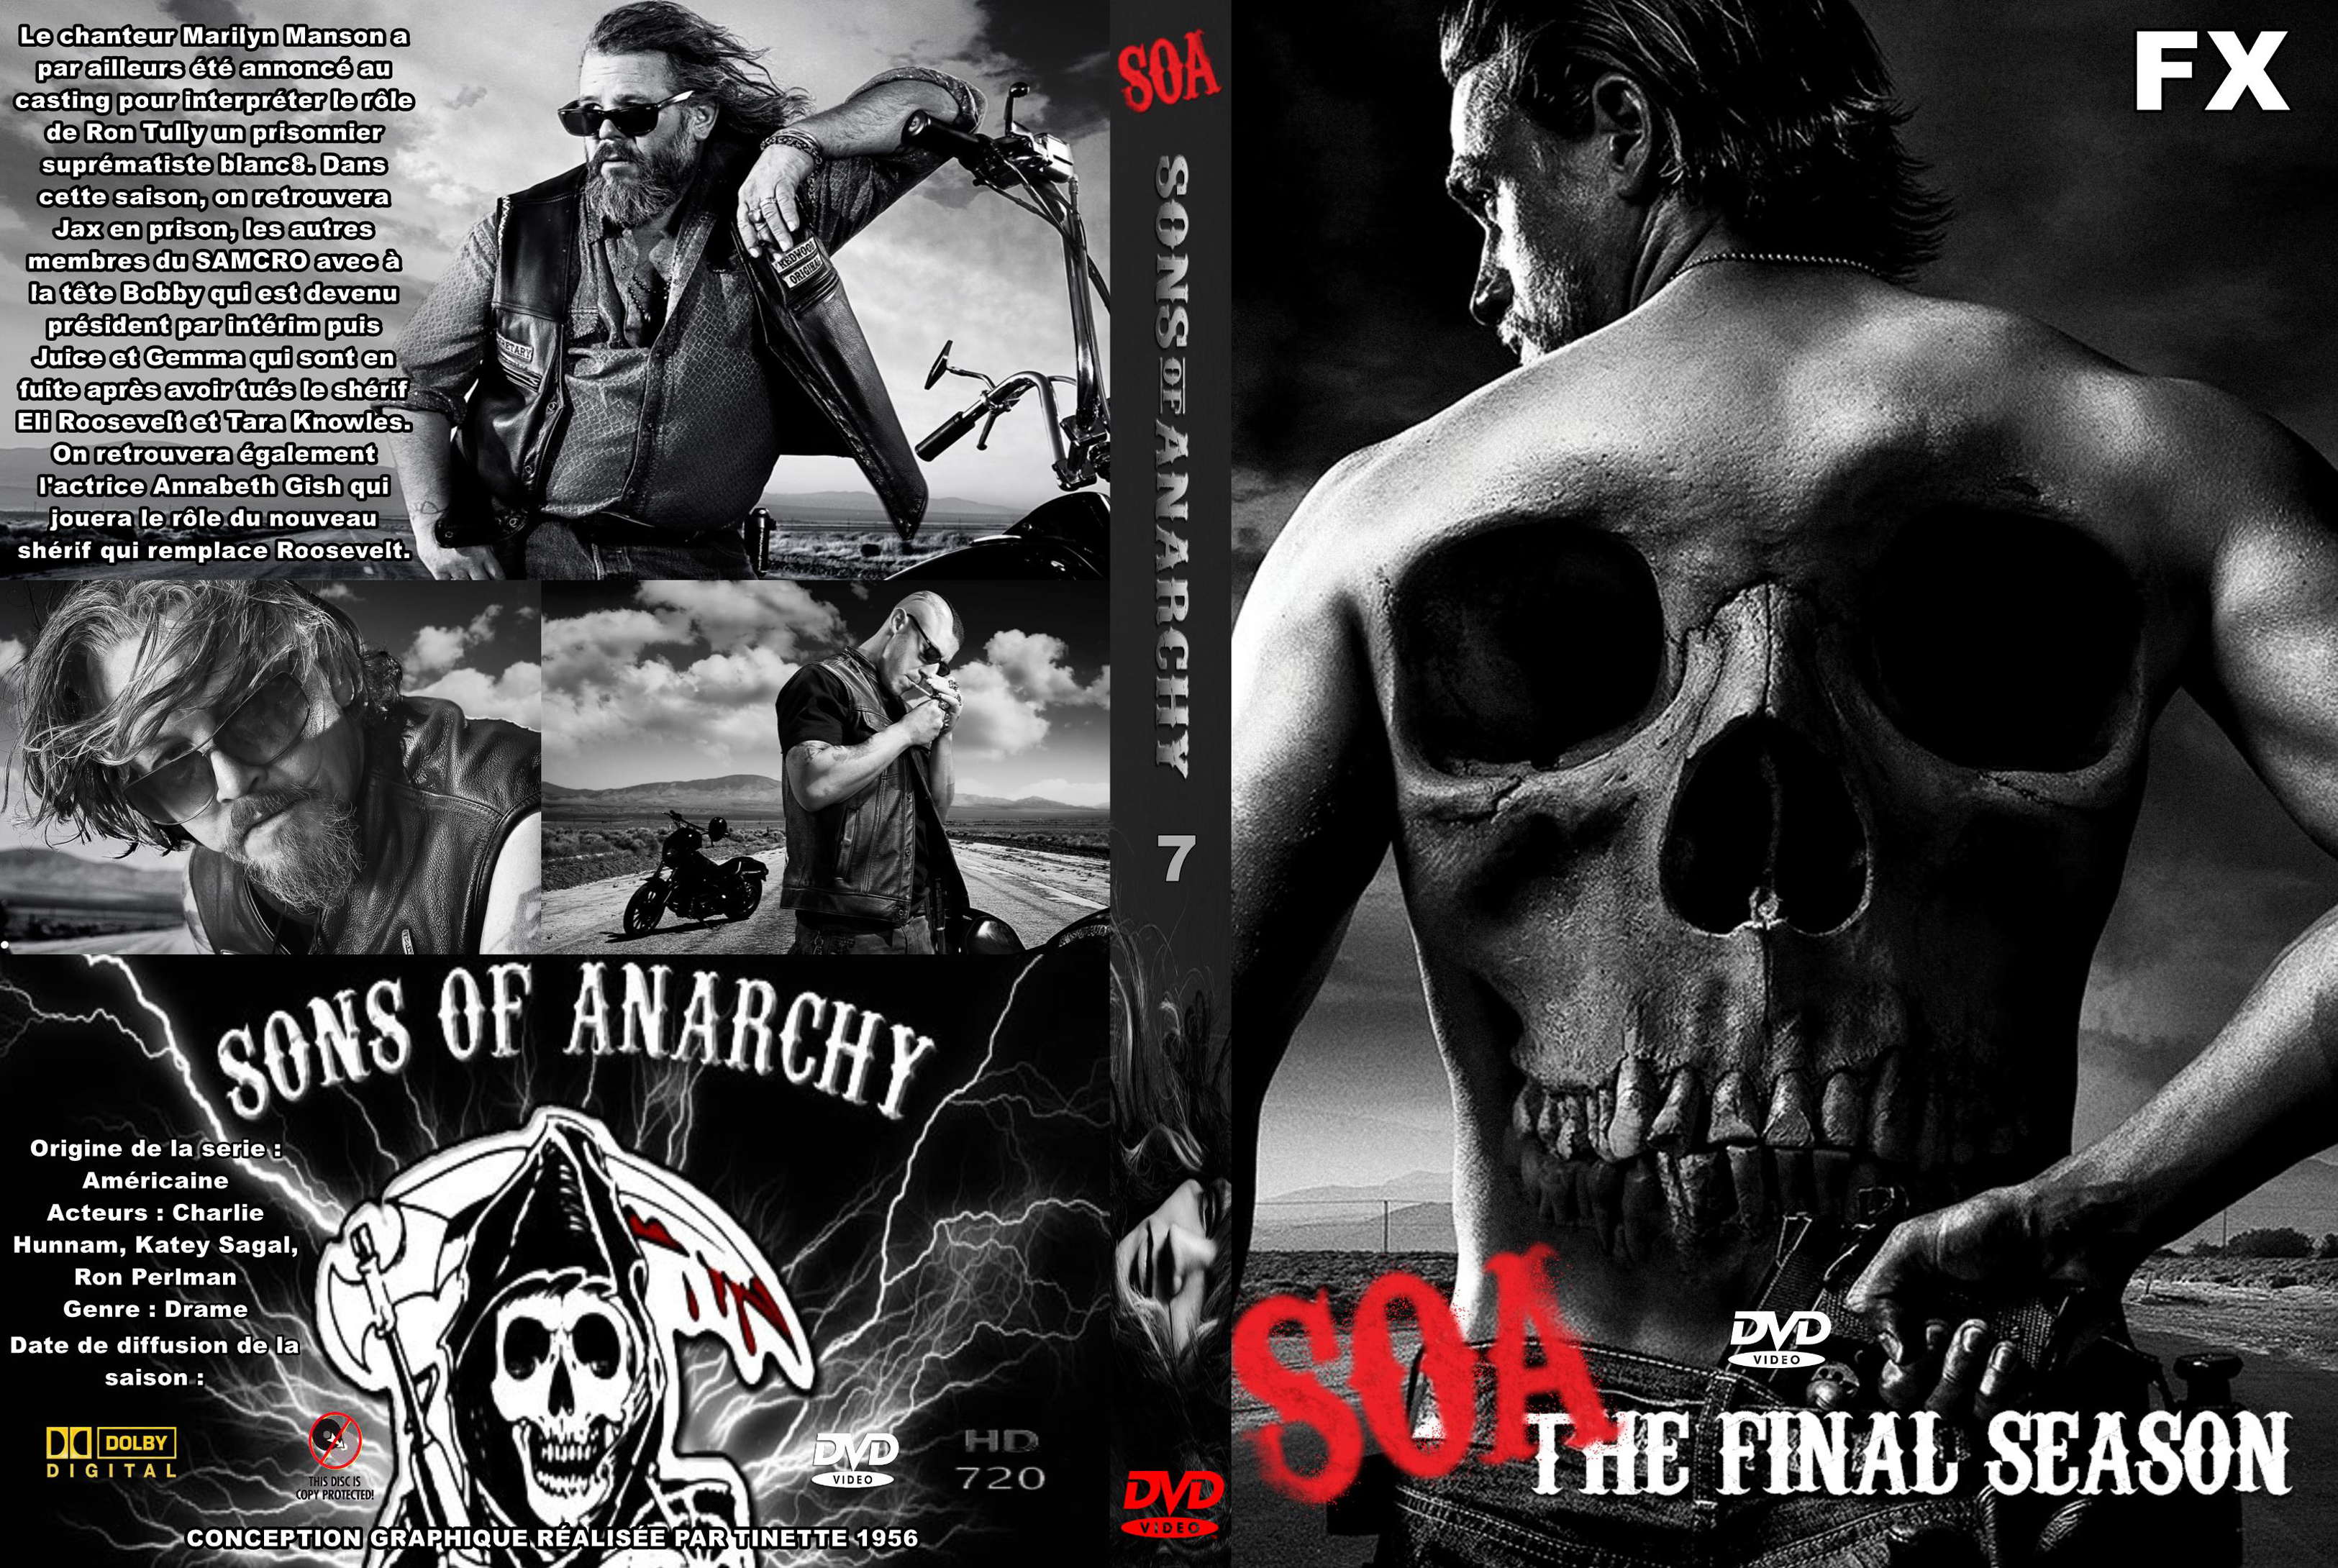 Jaquette DVD Sons of anarchy Saison 7 custom v2